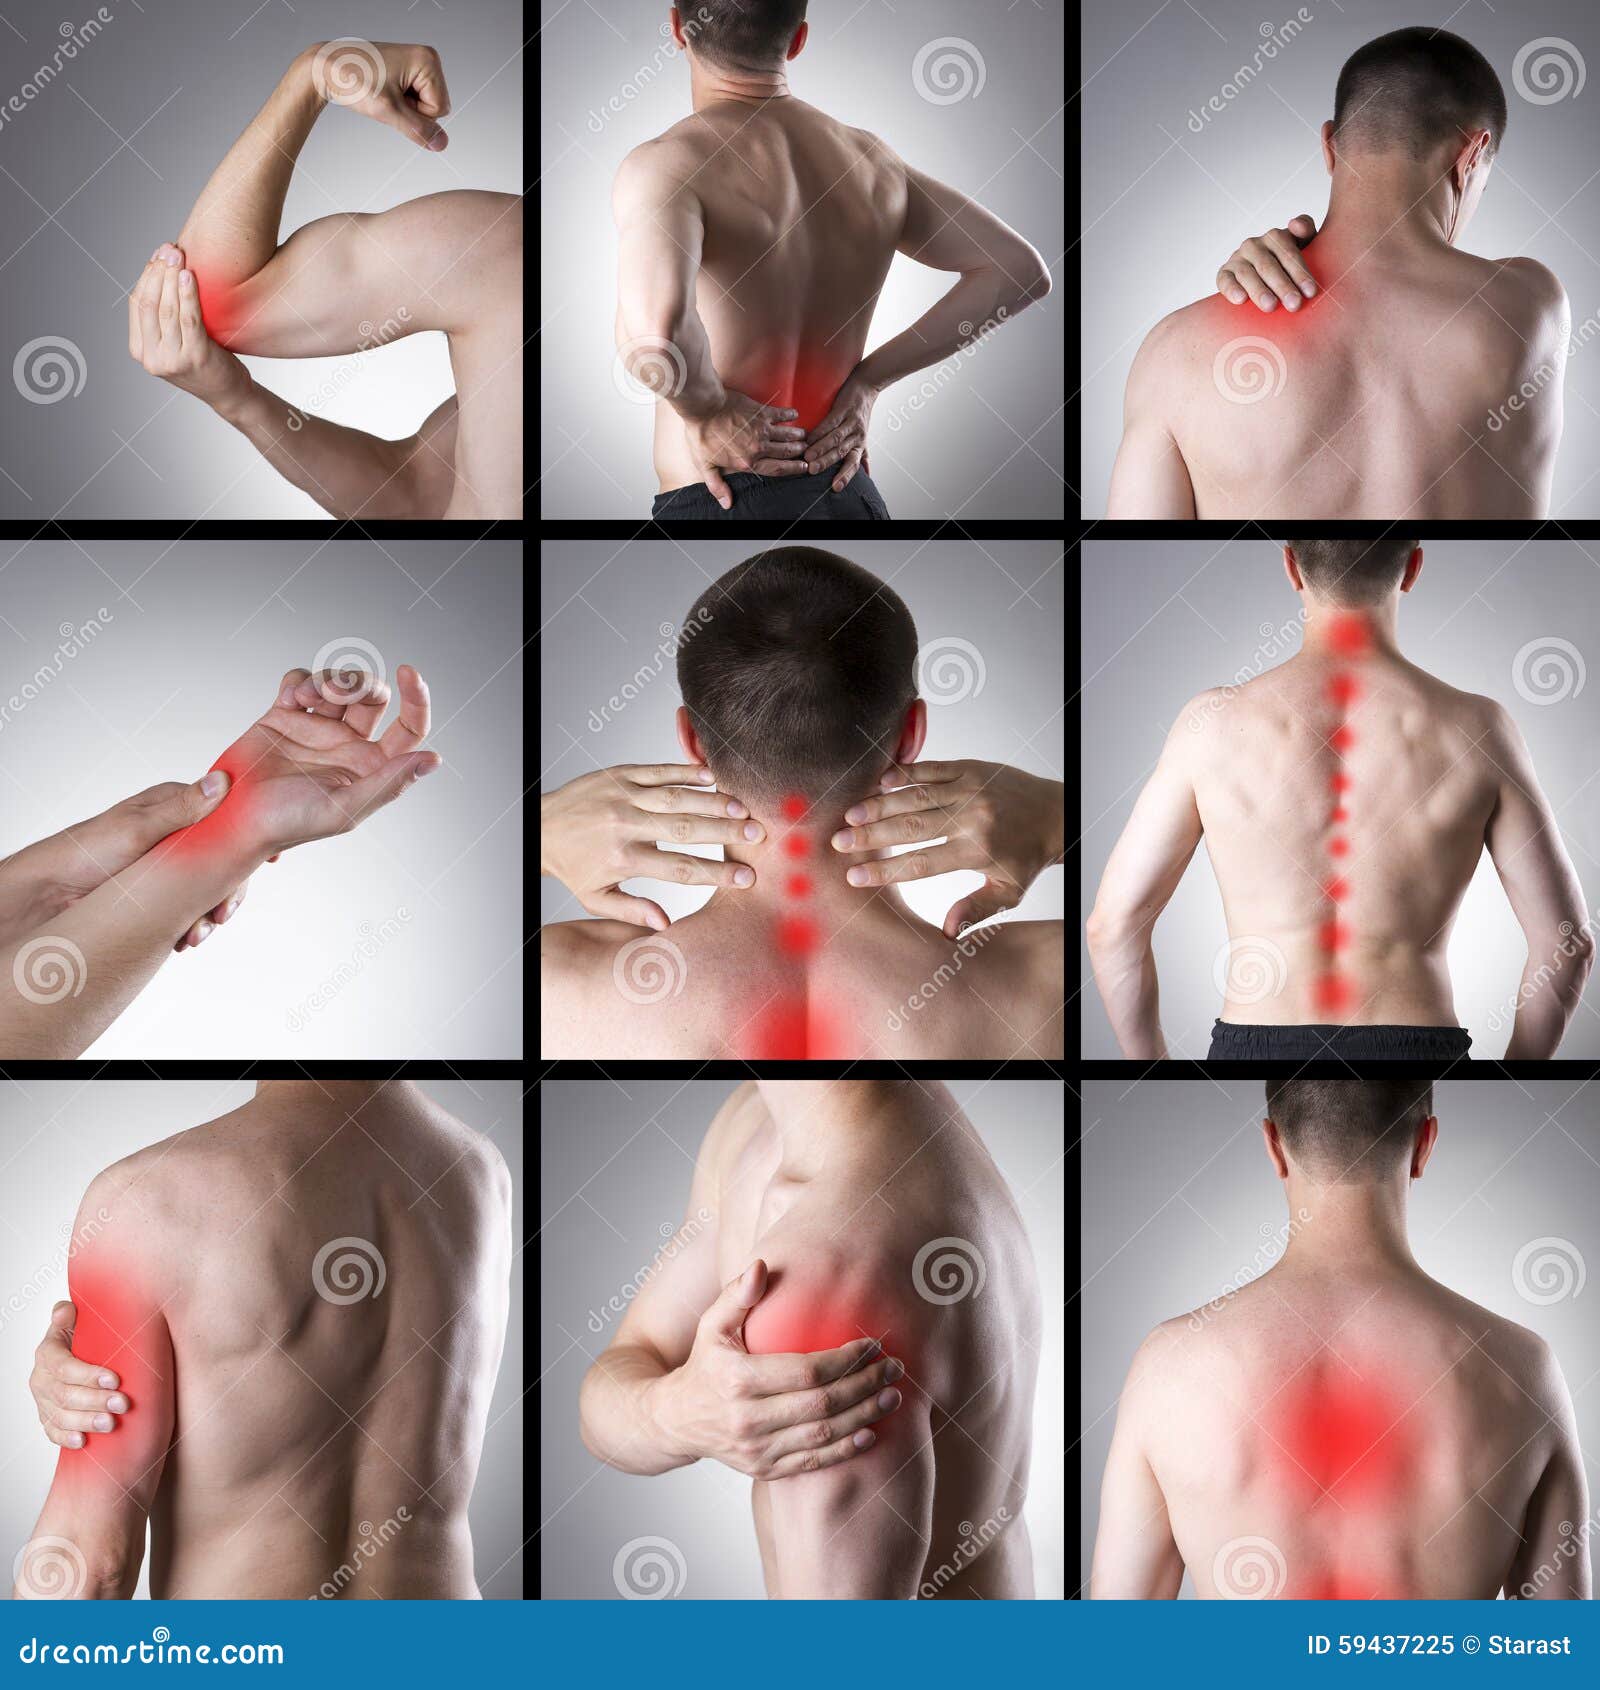 [Image: pain-man-s-body-collage-several-photos-r...437225.jpg]